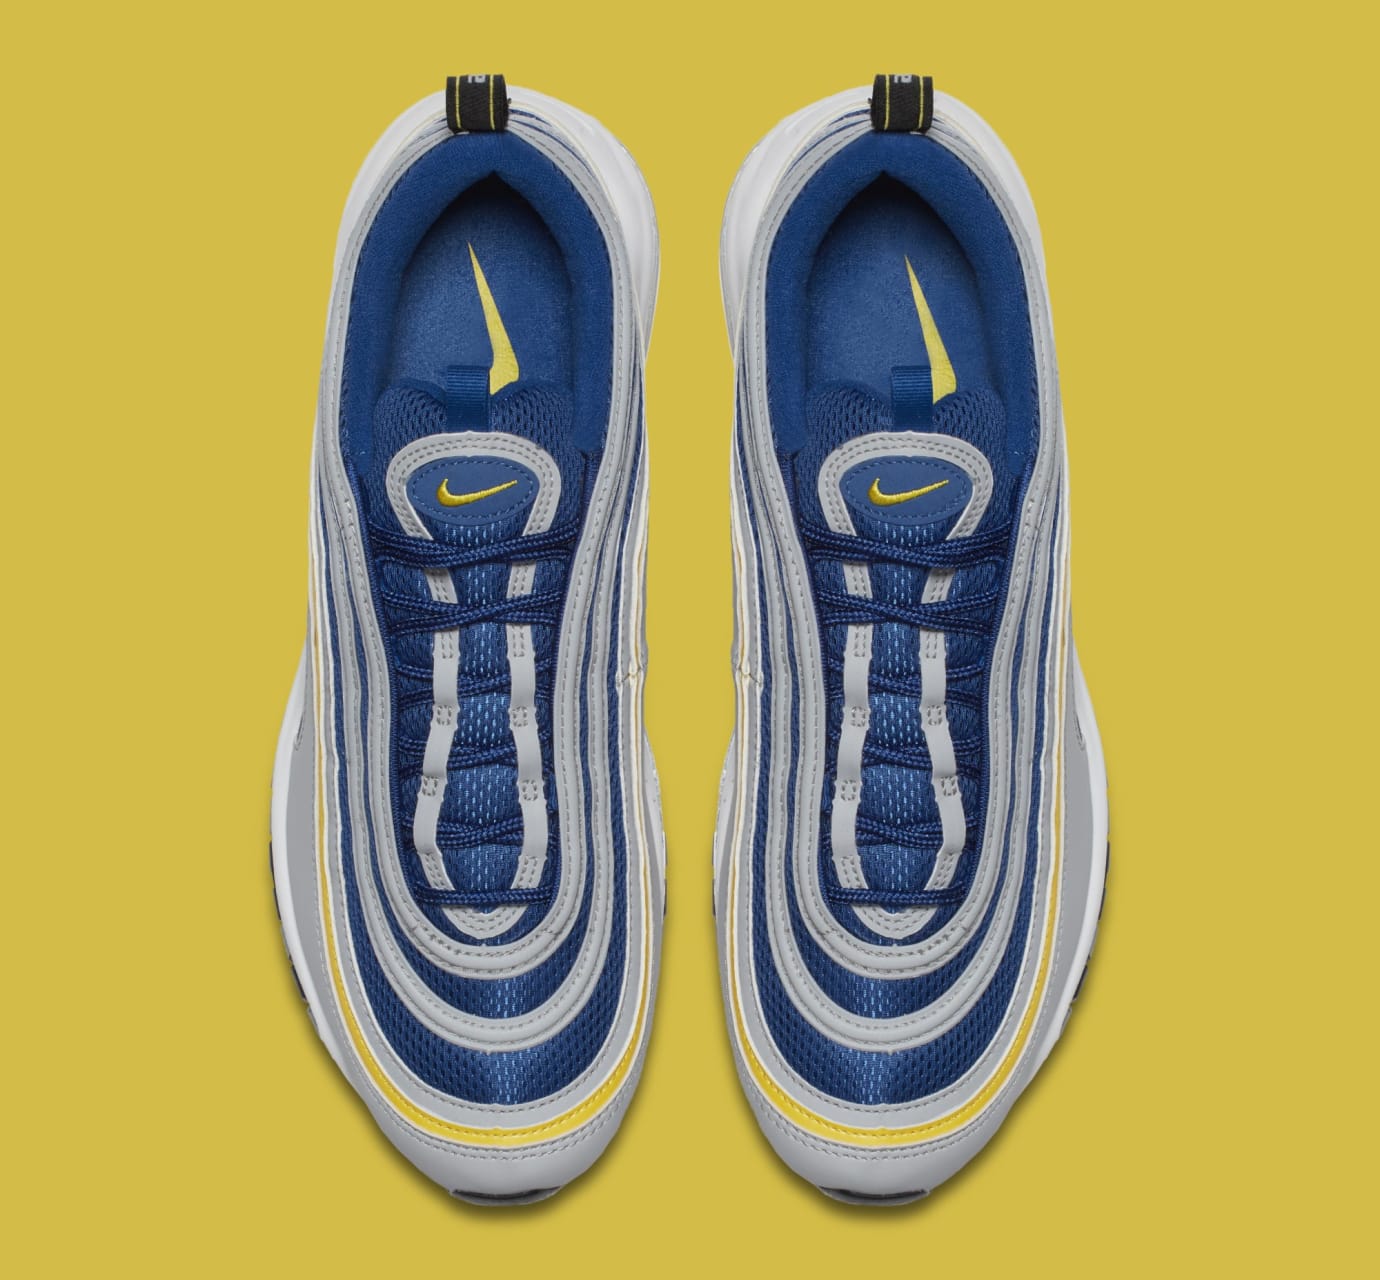 Nike Air Max 97 'Wolf Grey/Tour Yellow/Gym Blue' 921826-006 Release Date |  Sole Collector